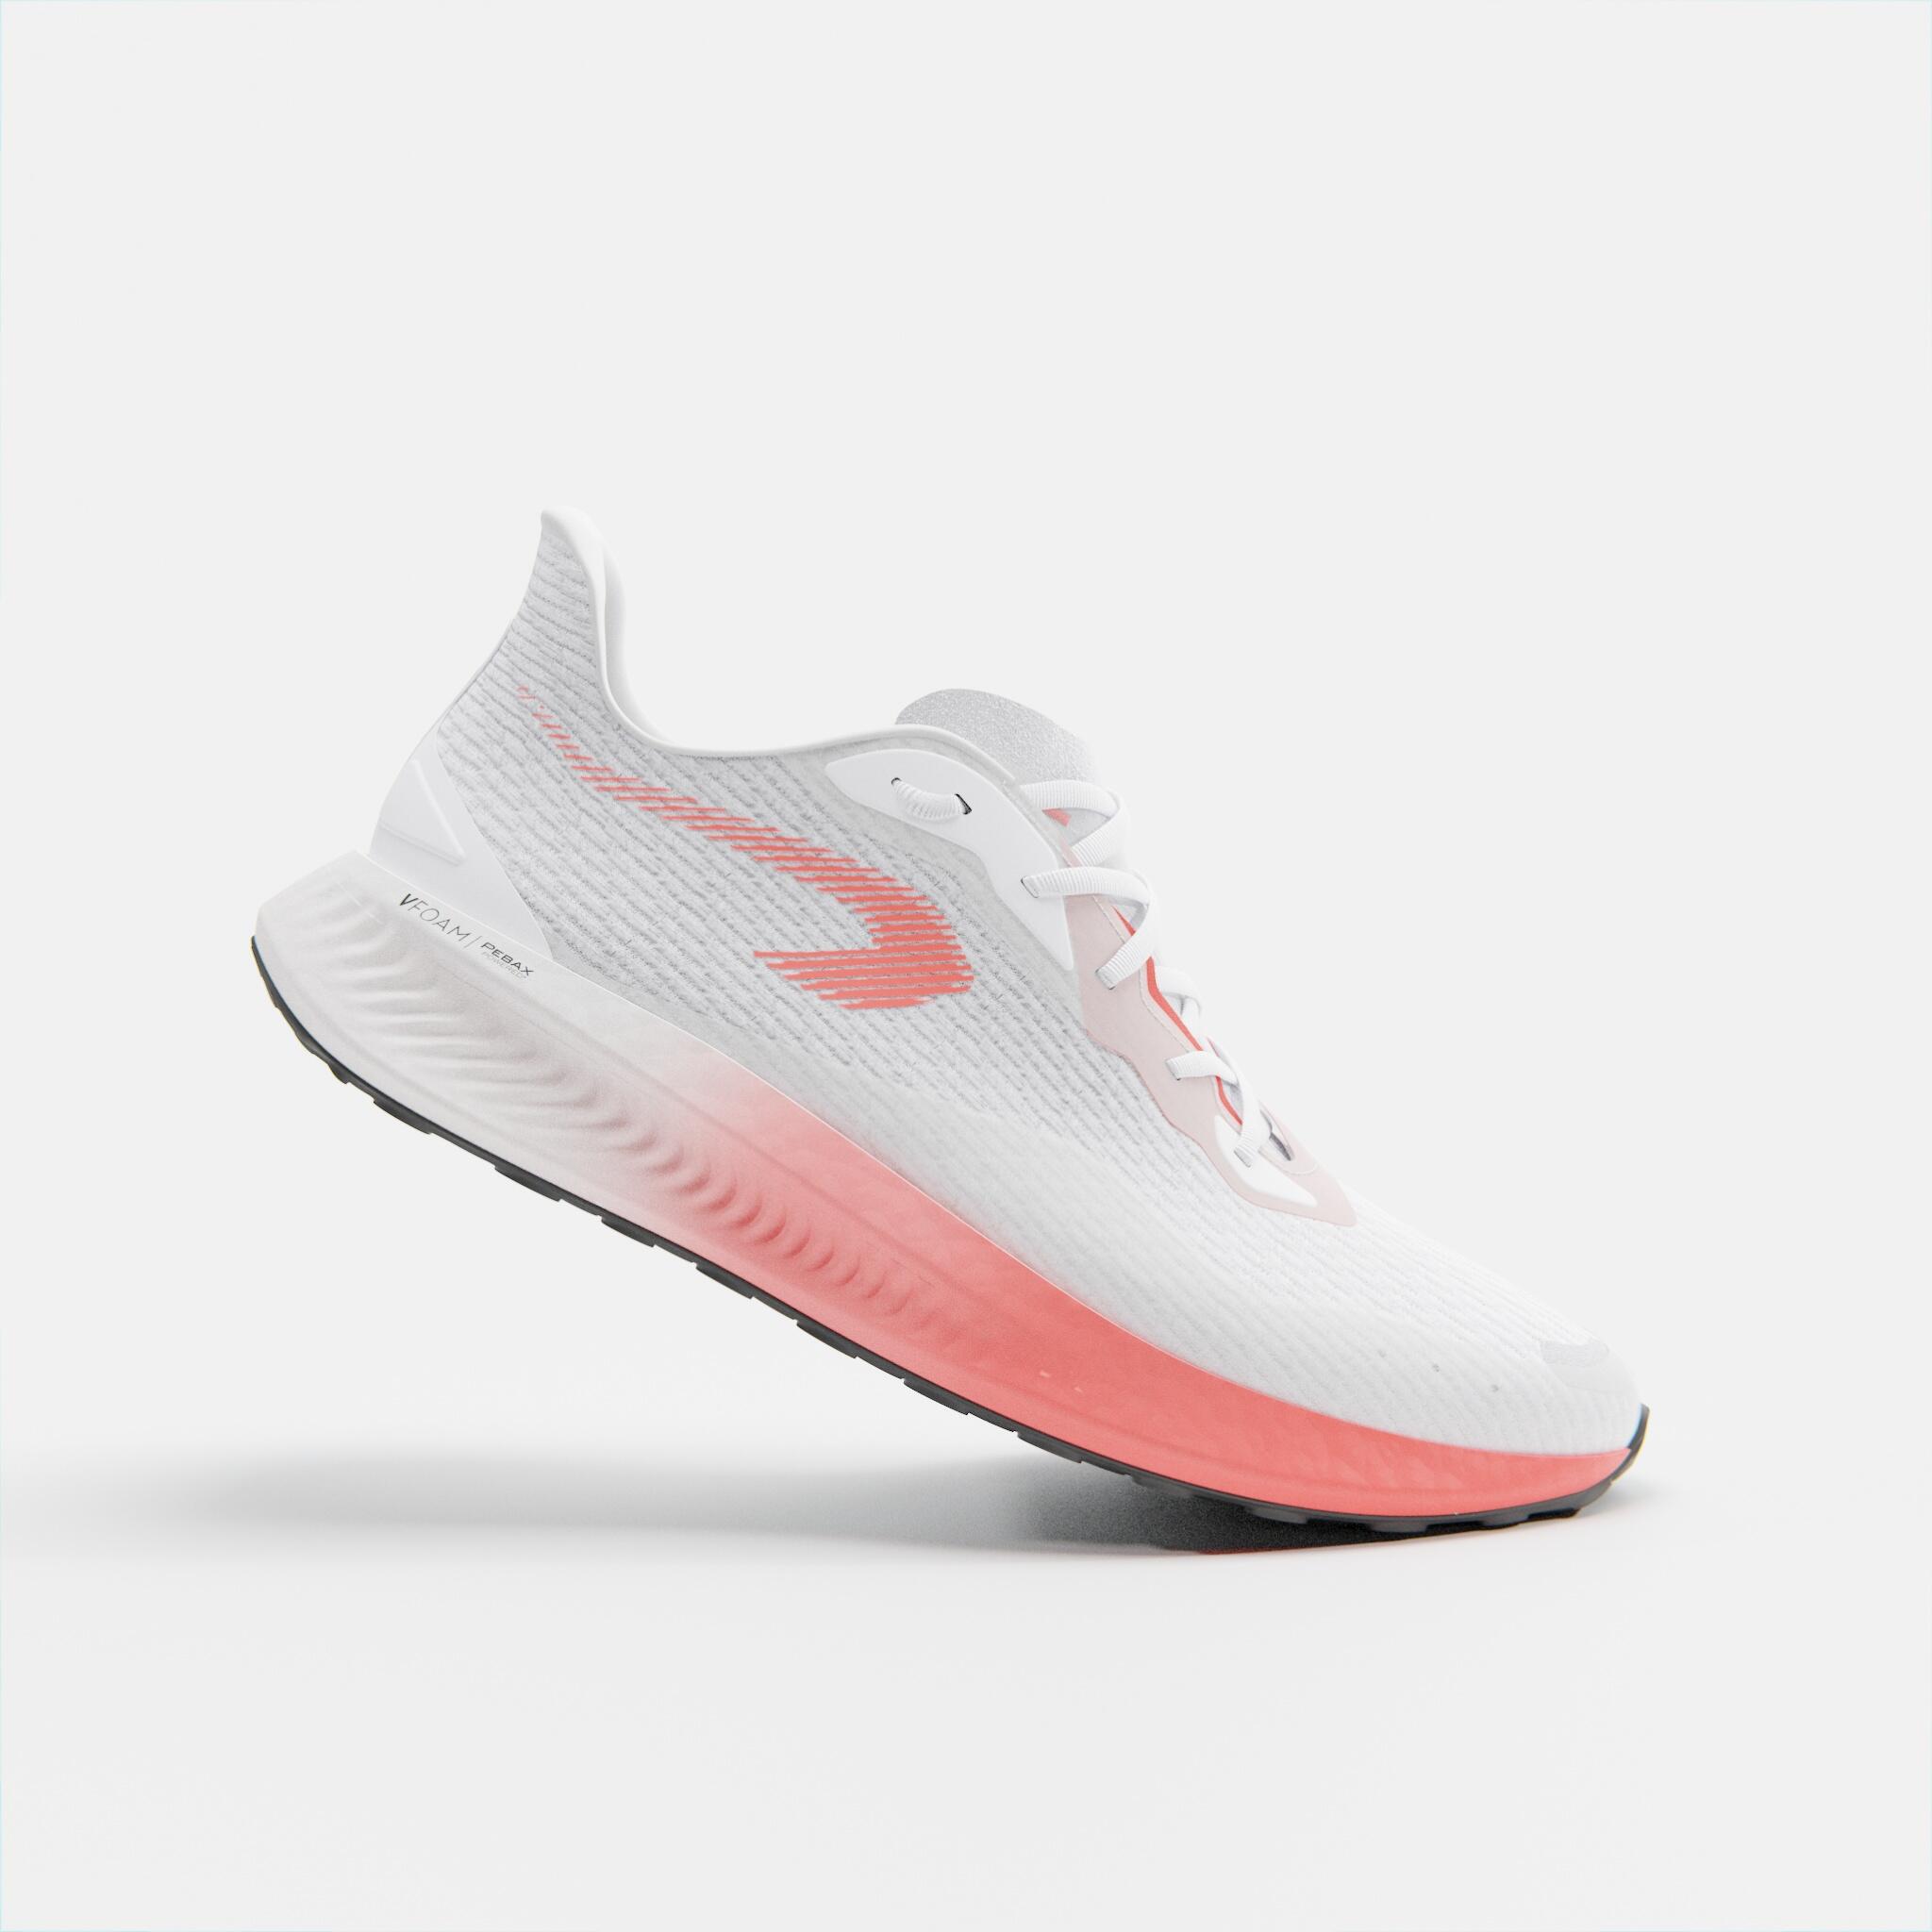 KIPRUN KD500 3 WOMEN'S RUNNING SHOES - WHITE AND CORAL 1/13